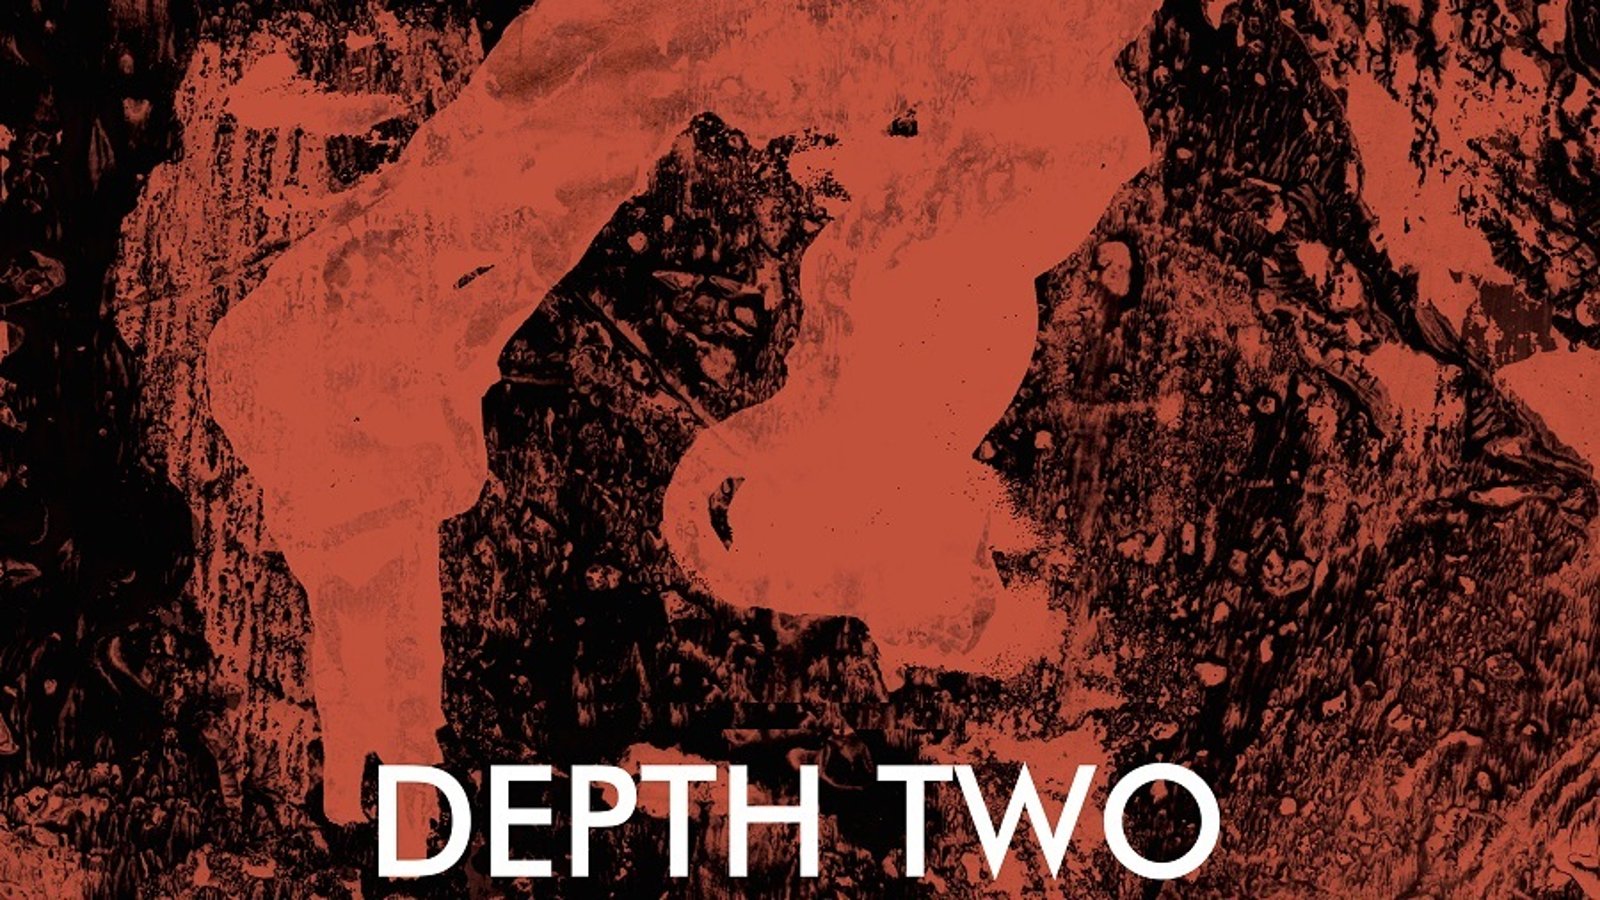 Depth Two - Investigating the Atrocities of the Kosovo War